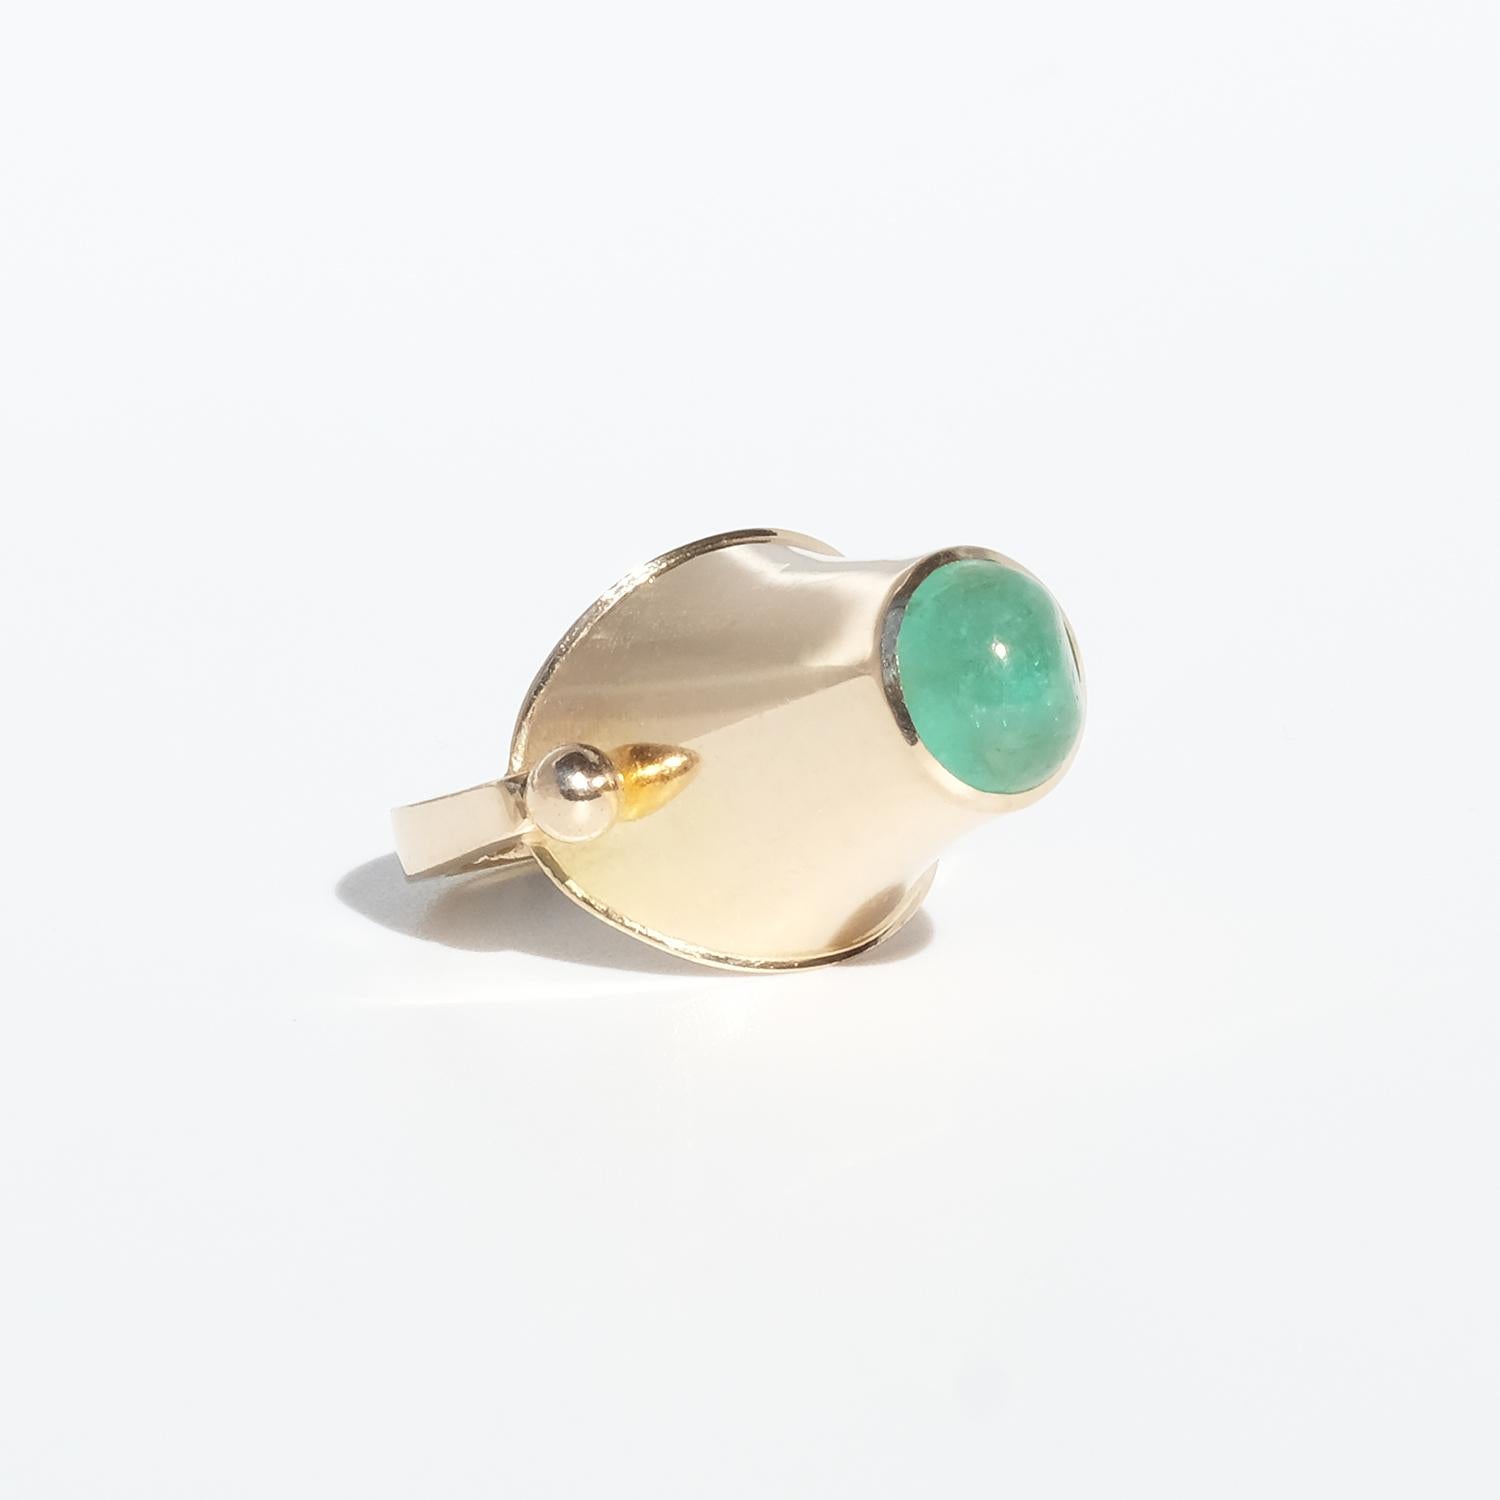 Swedish 18 K Gold Ring with an Emerald Made in 1966, Sigurd Persson 8